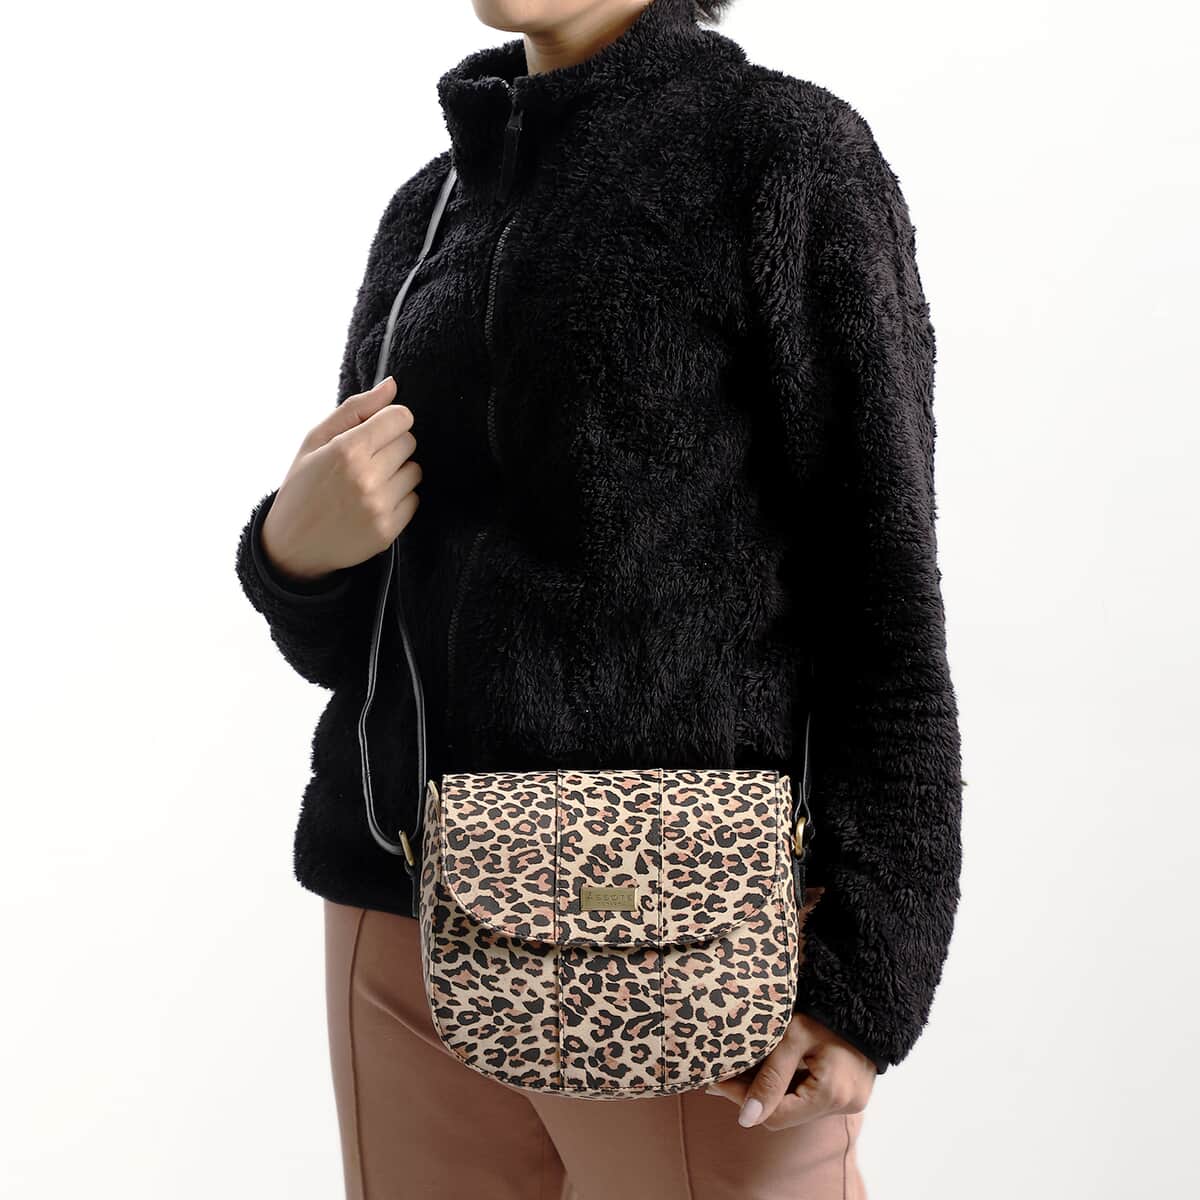 100% Genuine Leather Leopard Print Crossbody Sling Bag Size: 8.66(L)x8.07(H)x3.13(W) Inches Color: Brown image number 2